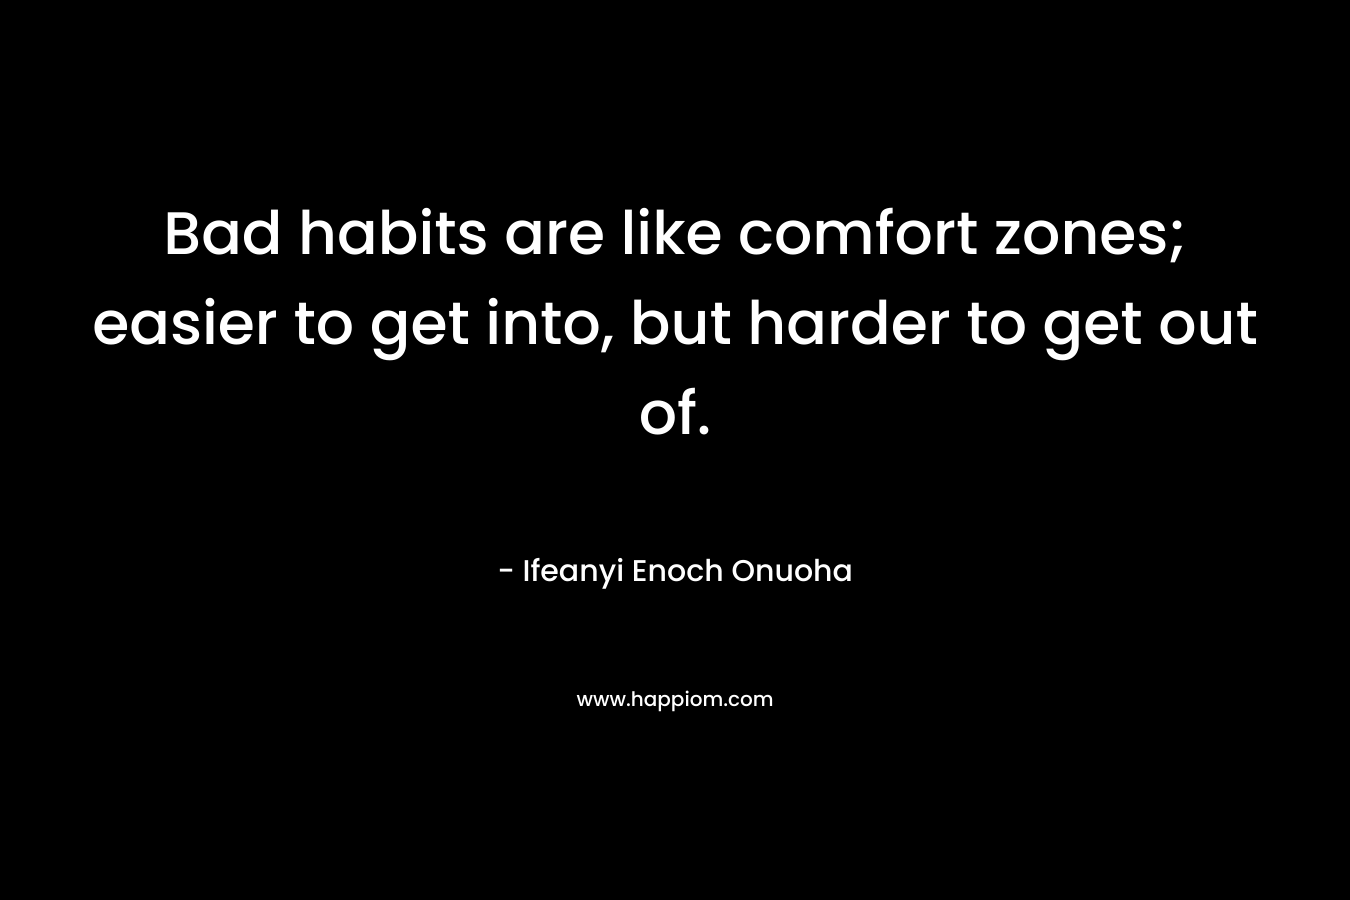 Bad habits are like comfort zones; easier to get into, but harder to get out of.